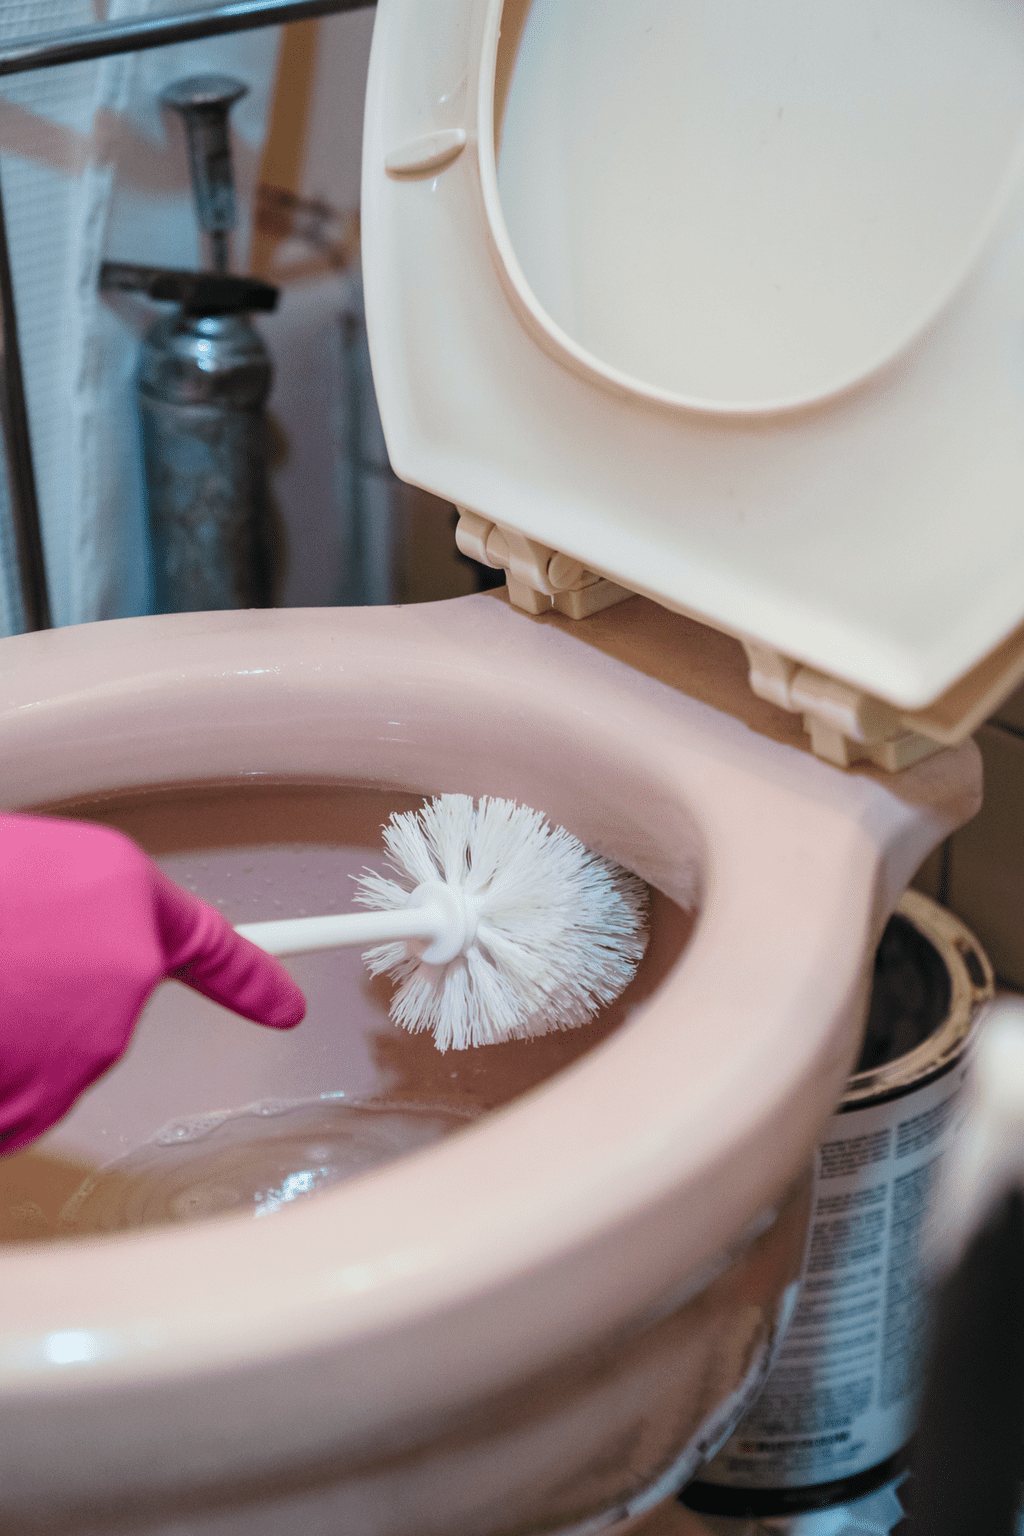 Using a brush to clean the rim jet: https://www.pexels.com/photo/using-a-brush-to-clean-the-toilet-9462642/